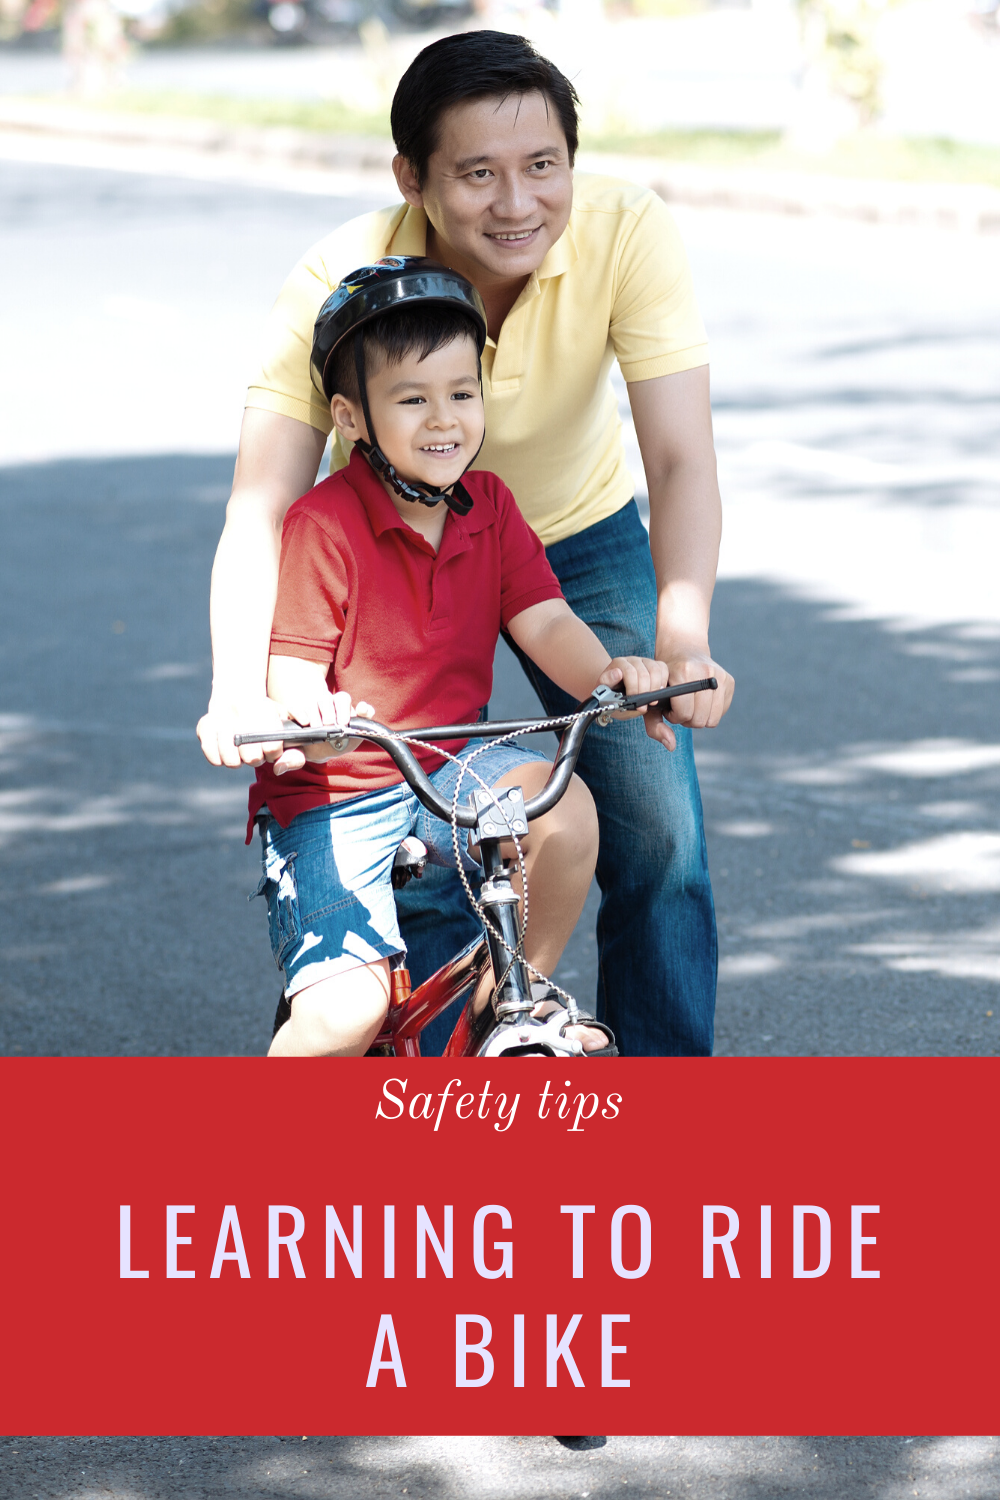 3 Safety Principles to Teach Your Child When Learning to Ride a Bike